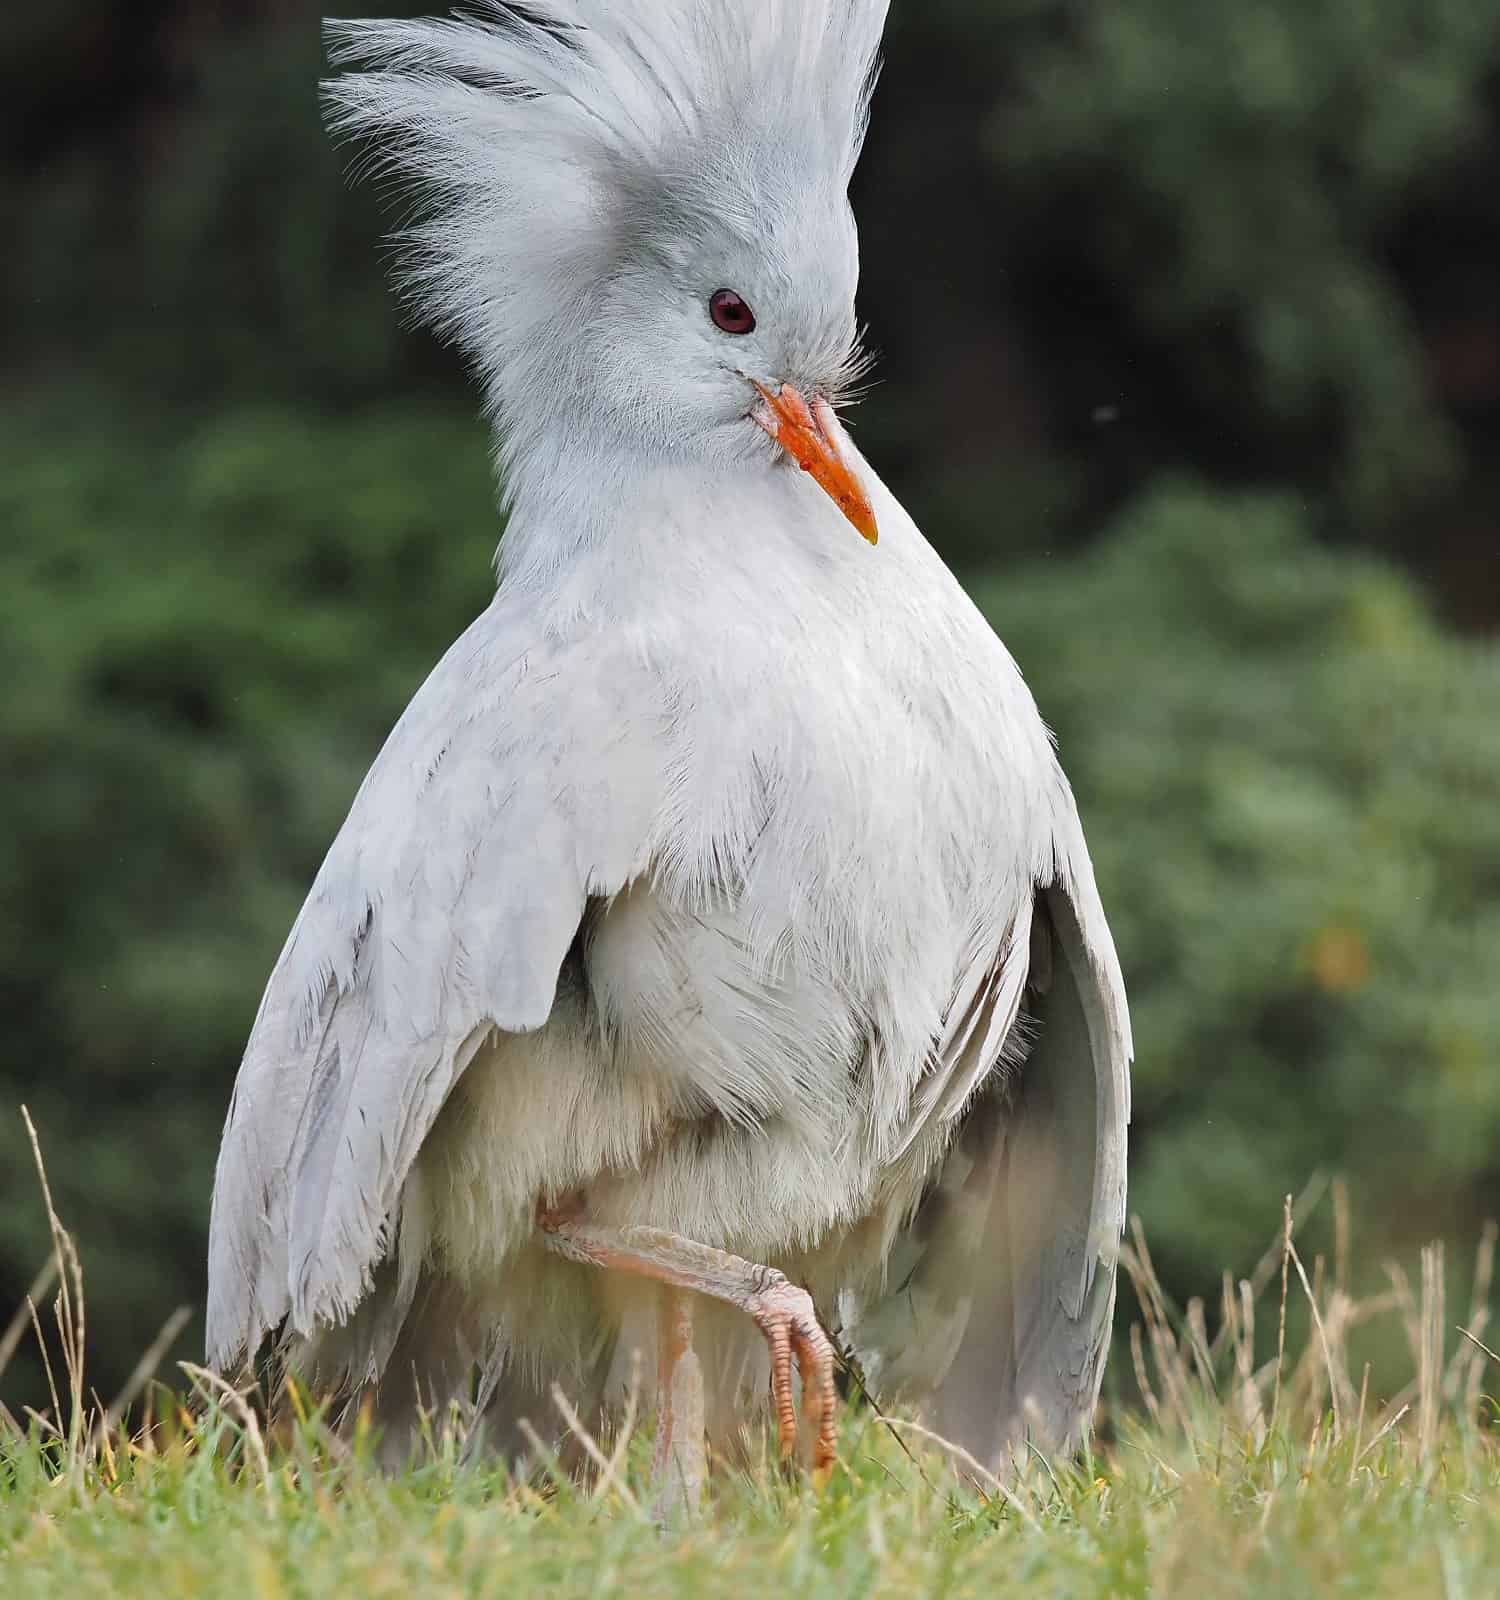 Kagu from New Caledonia with upright crown of feathers on a meadow; Rhynochetos jubatus